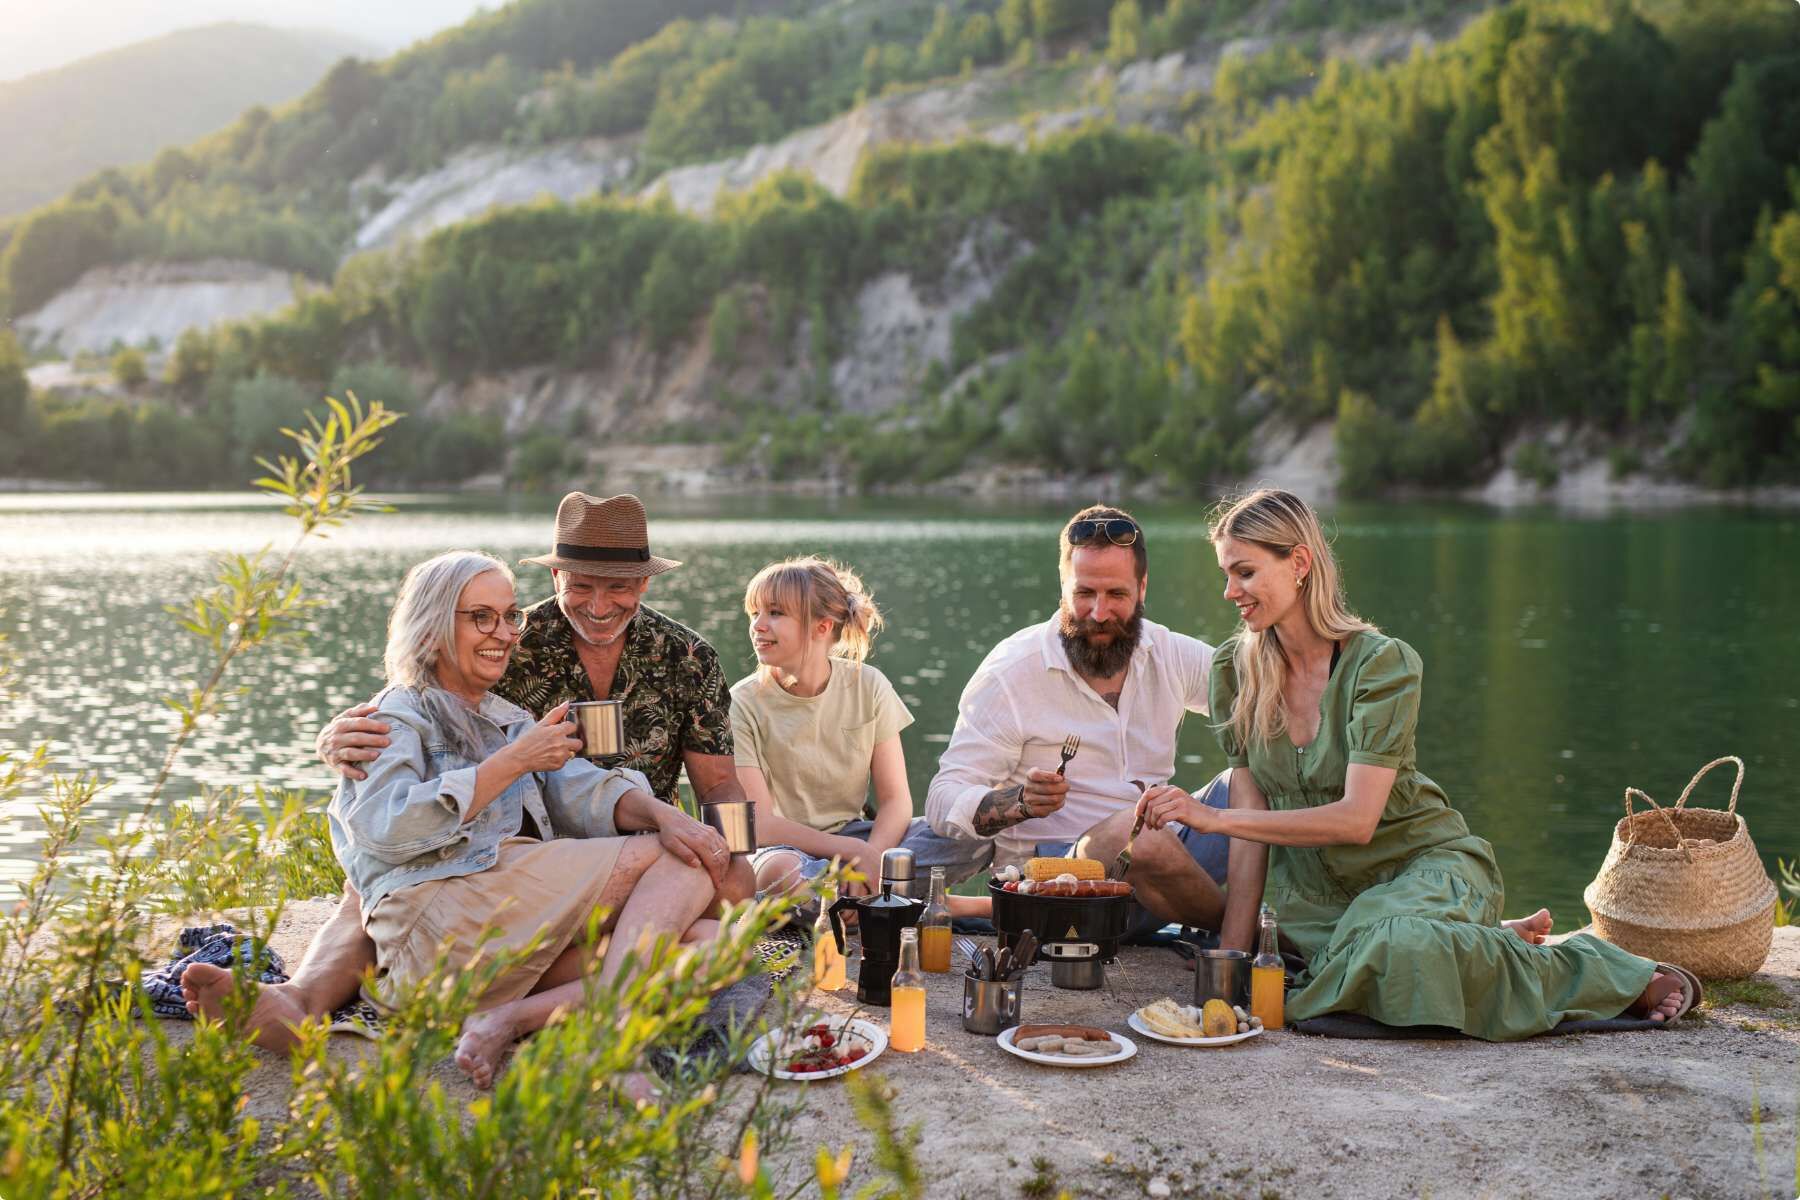 Family of five having a picnic along a lakefront with part of a mountain in the background.